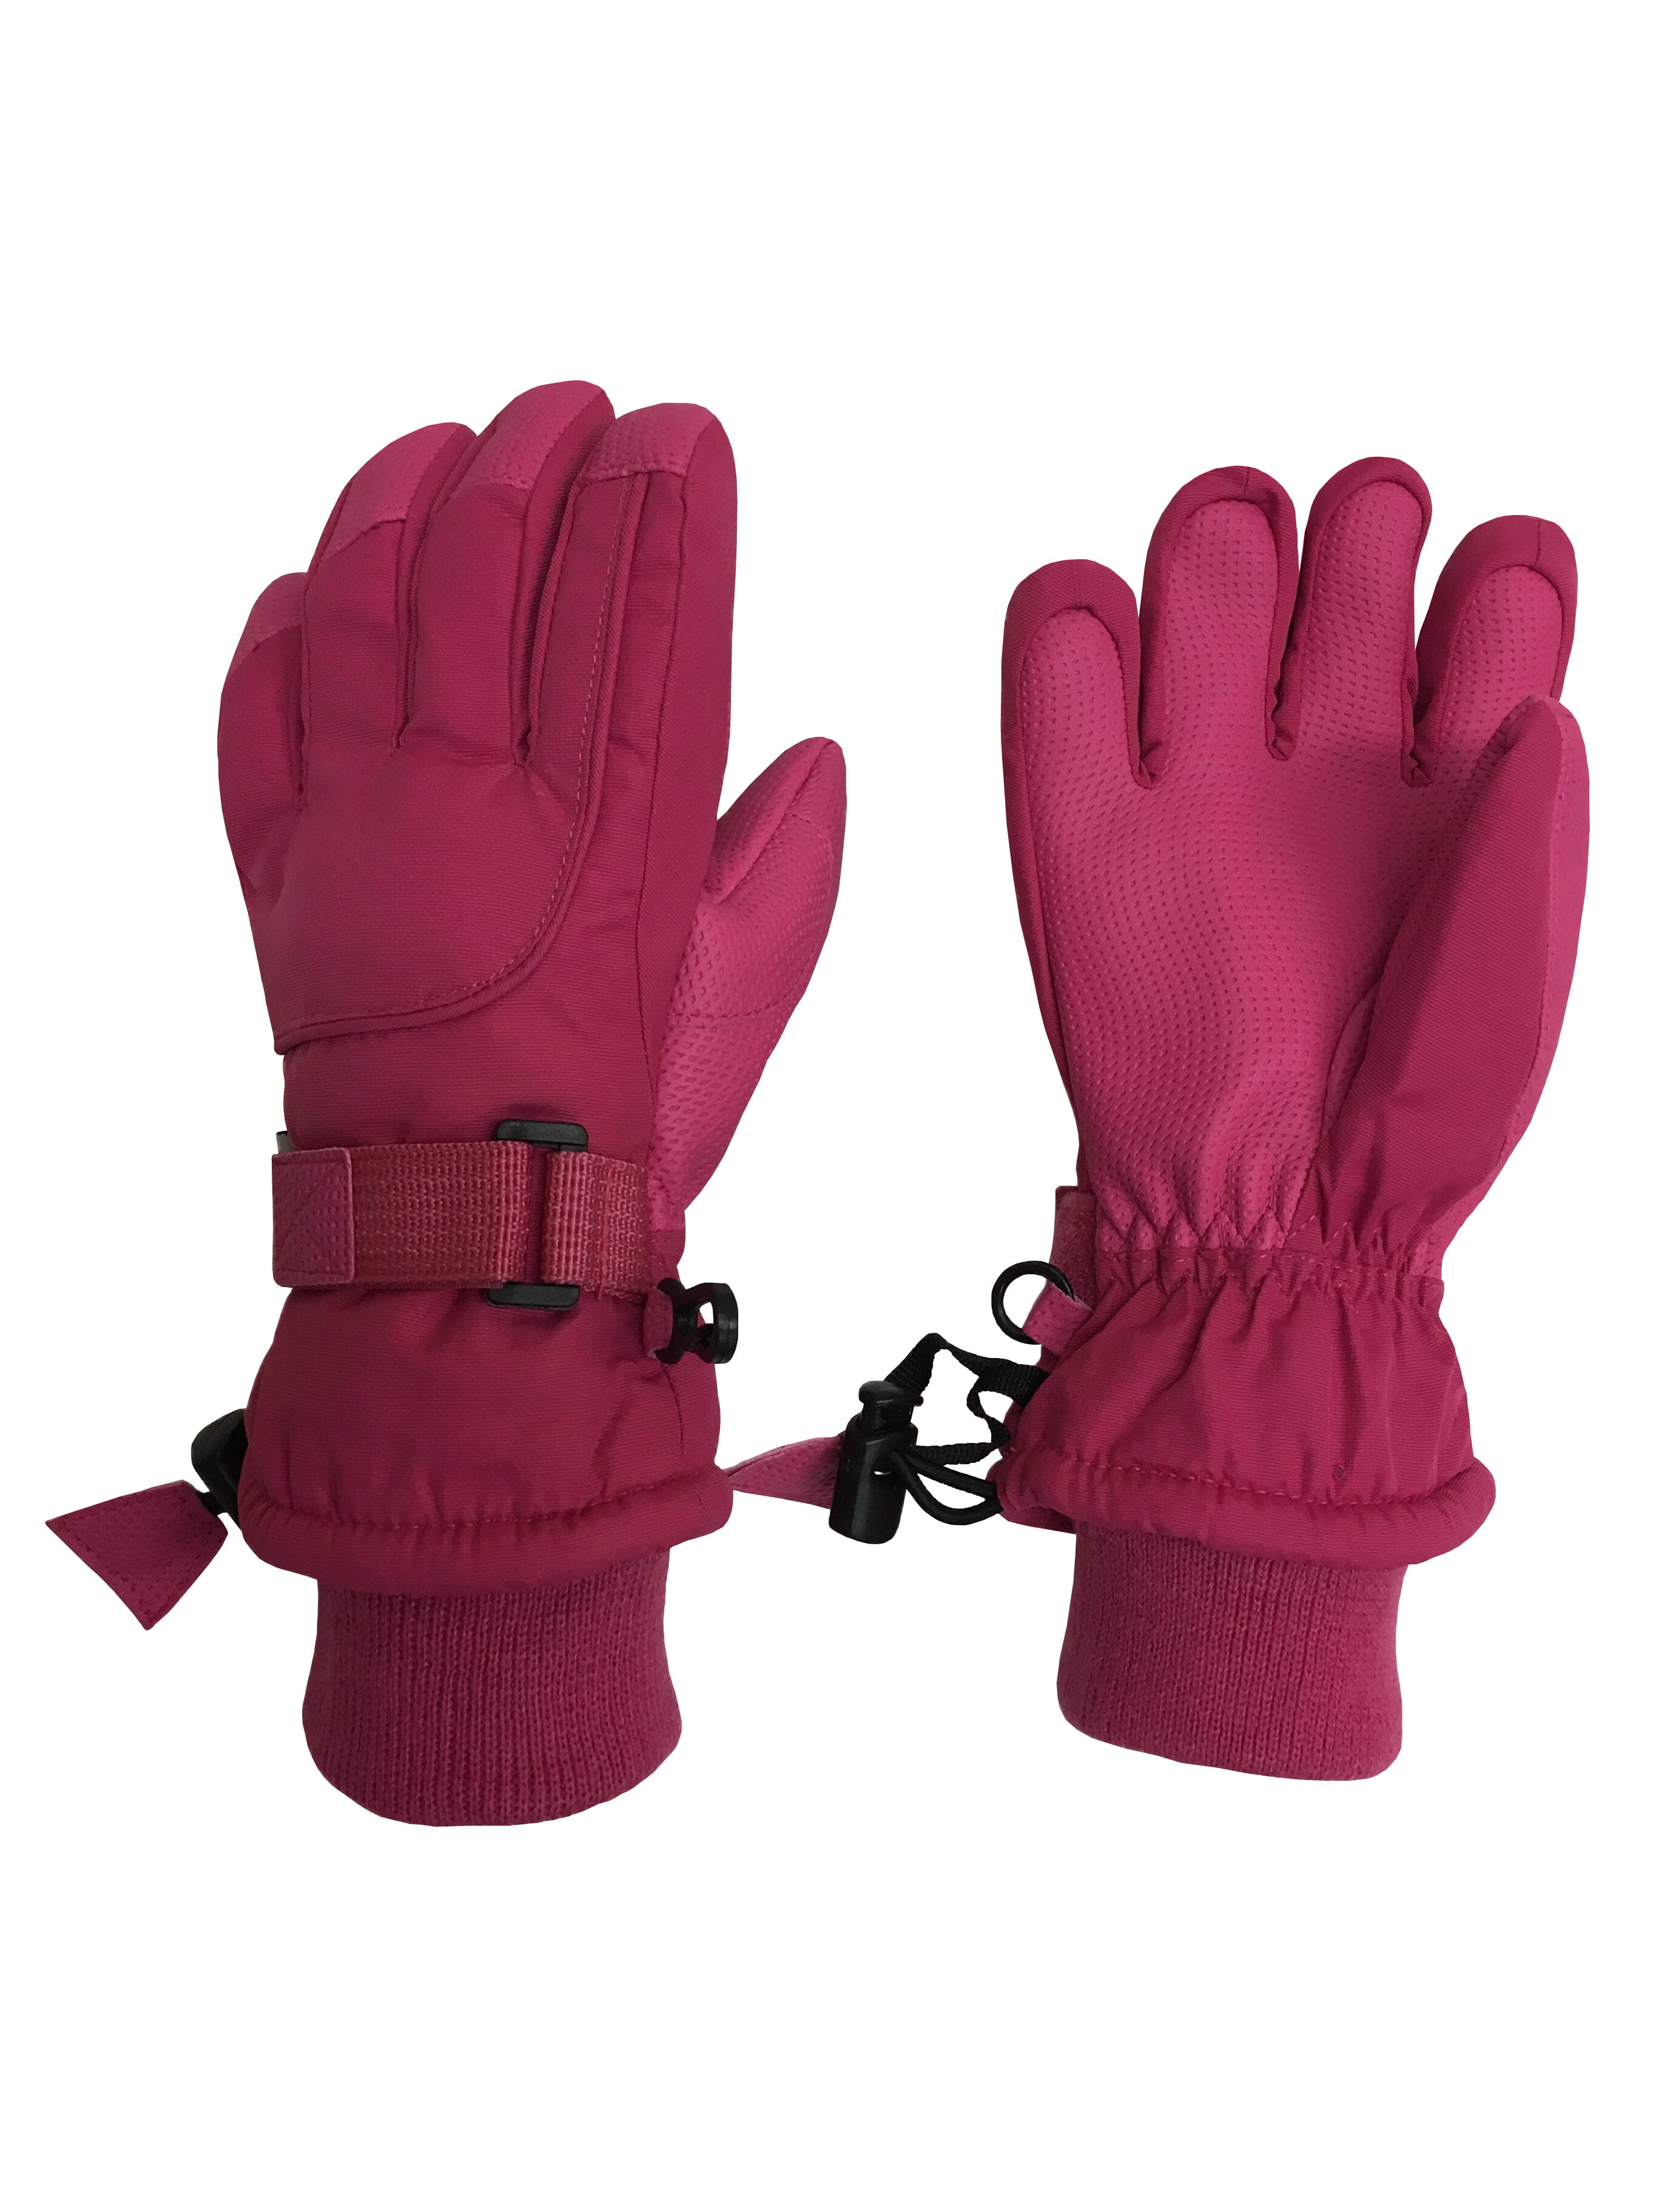 NIce Caps Womens Cold Weather Thinsulate Waterproof Winter Ski Gloves